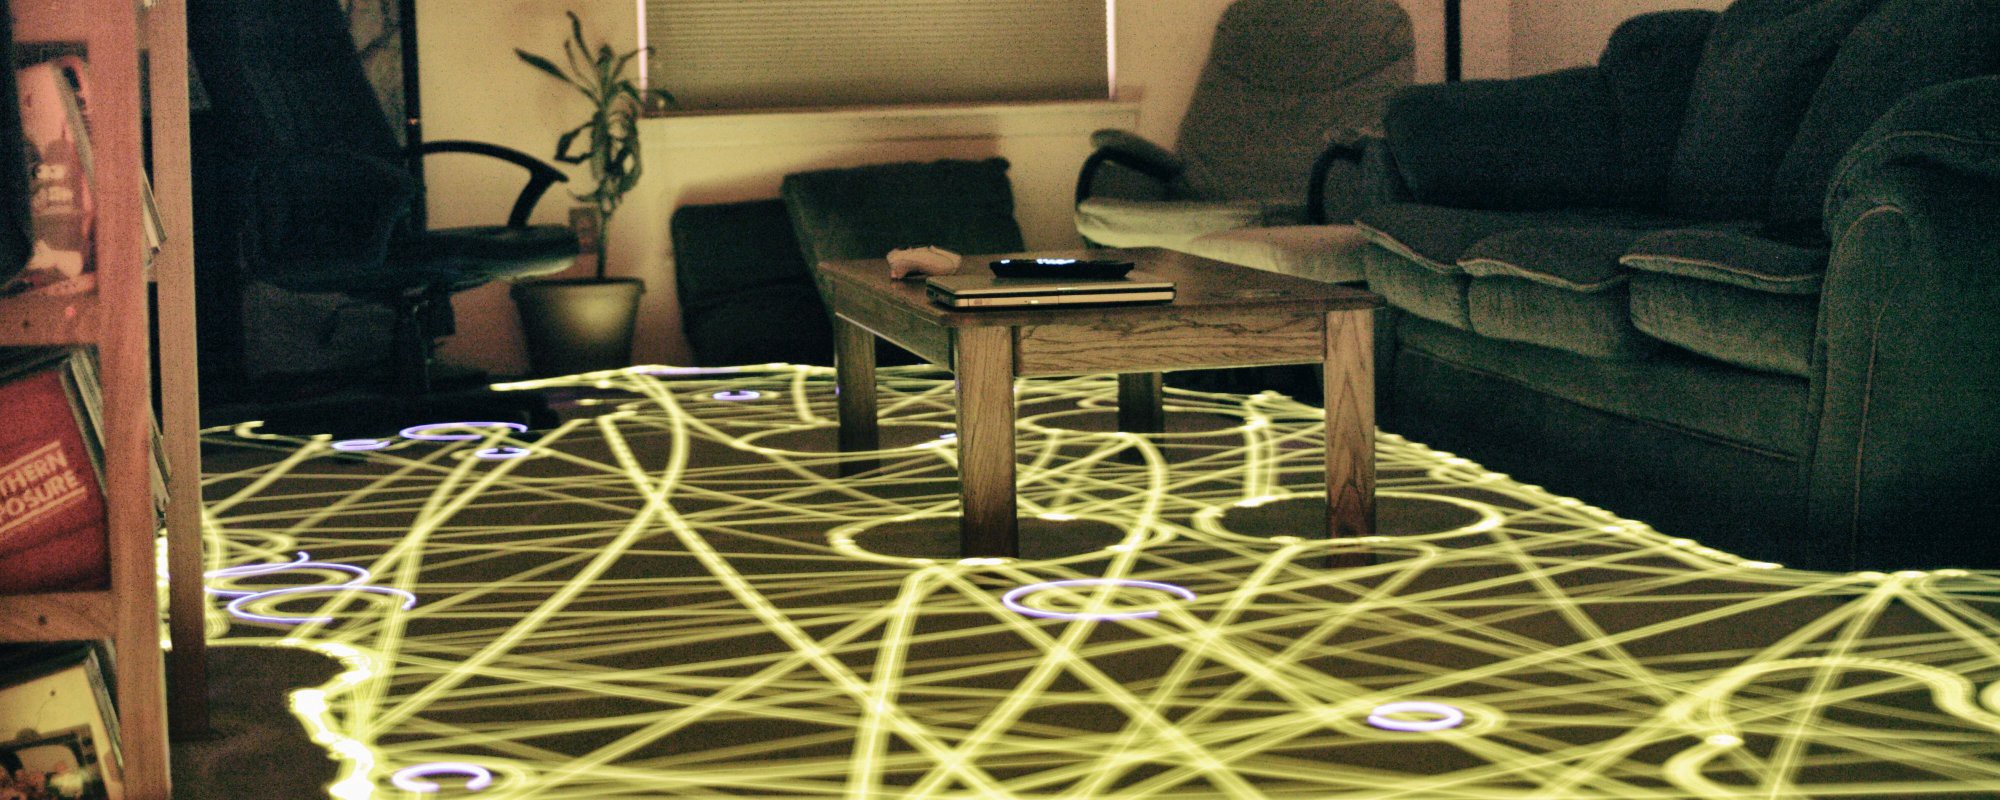 A timelapse photograph of a robot vacuum's trip around the lounge of a home, showing its path marked out as a trail of light.